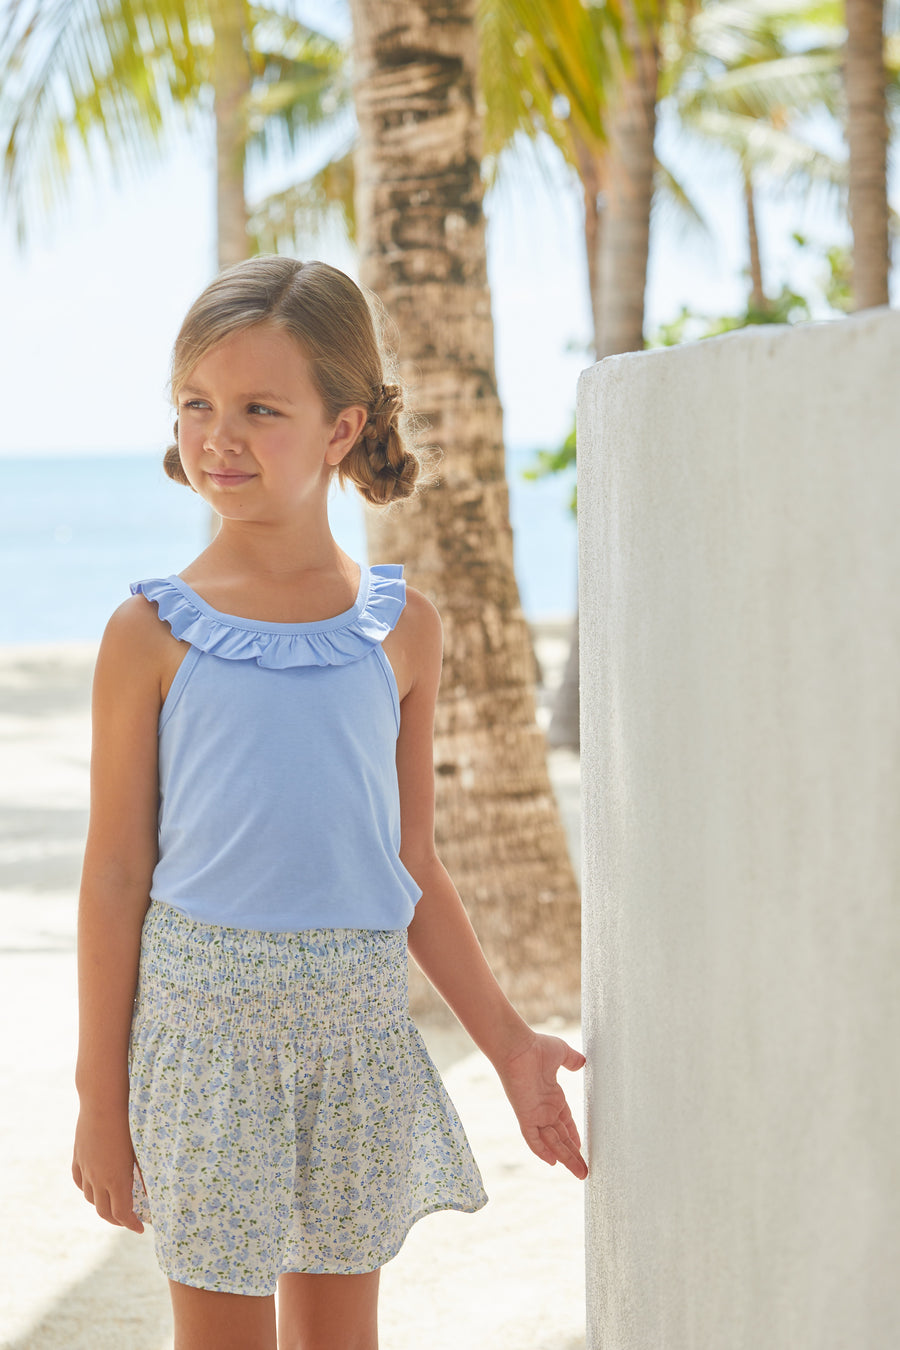 Little English classic children's clothing, girl's knit tank top with ruffled collar in light blue